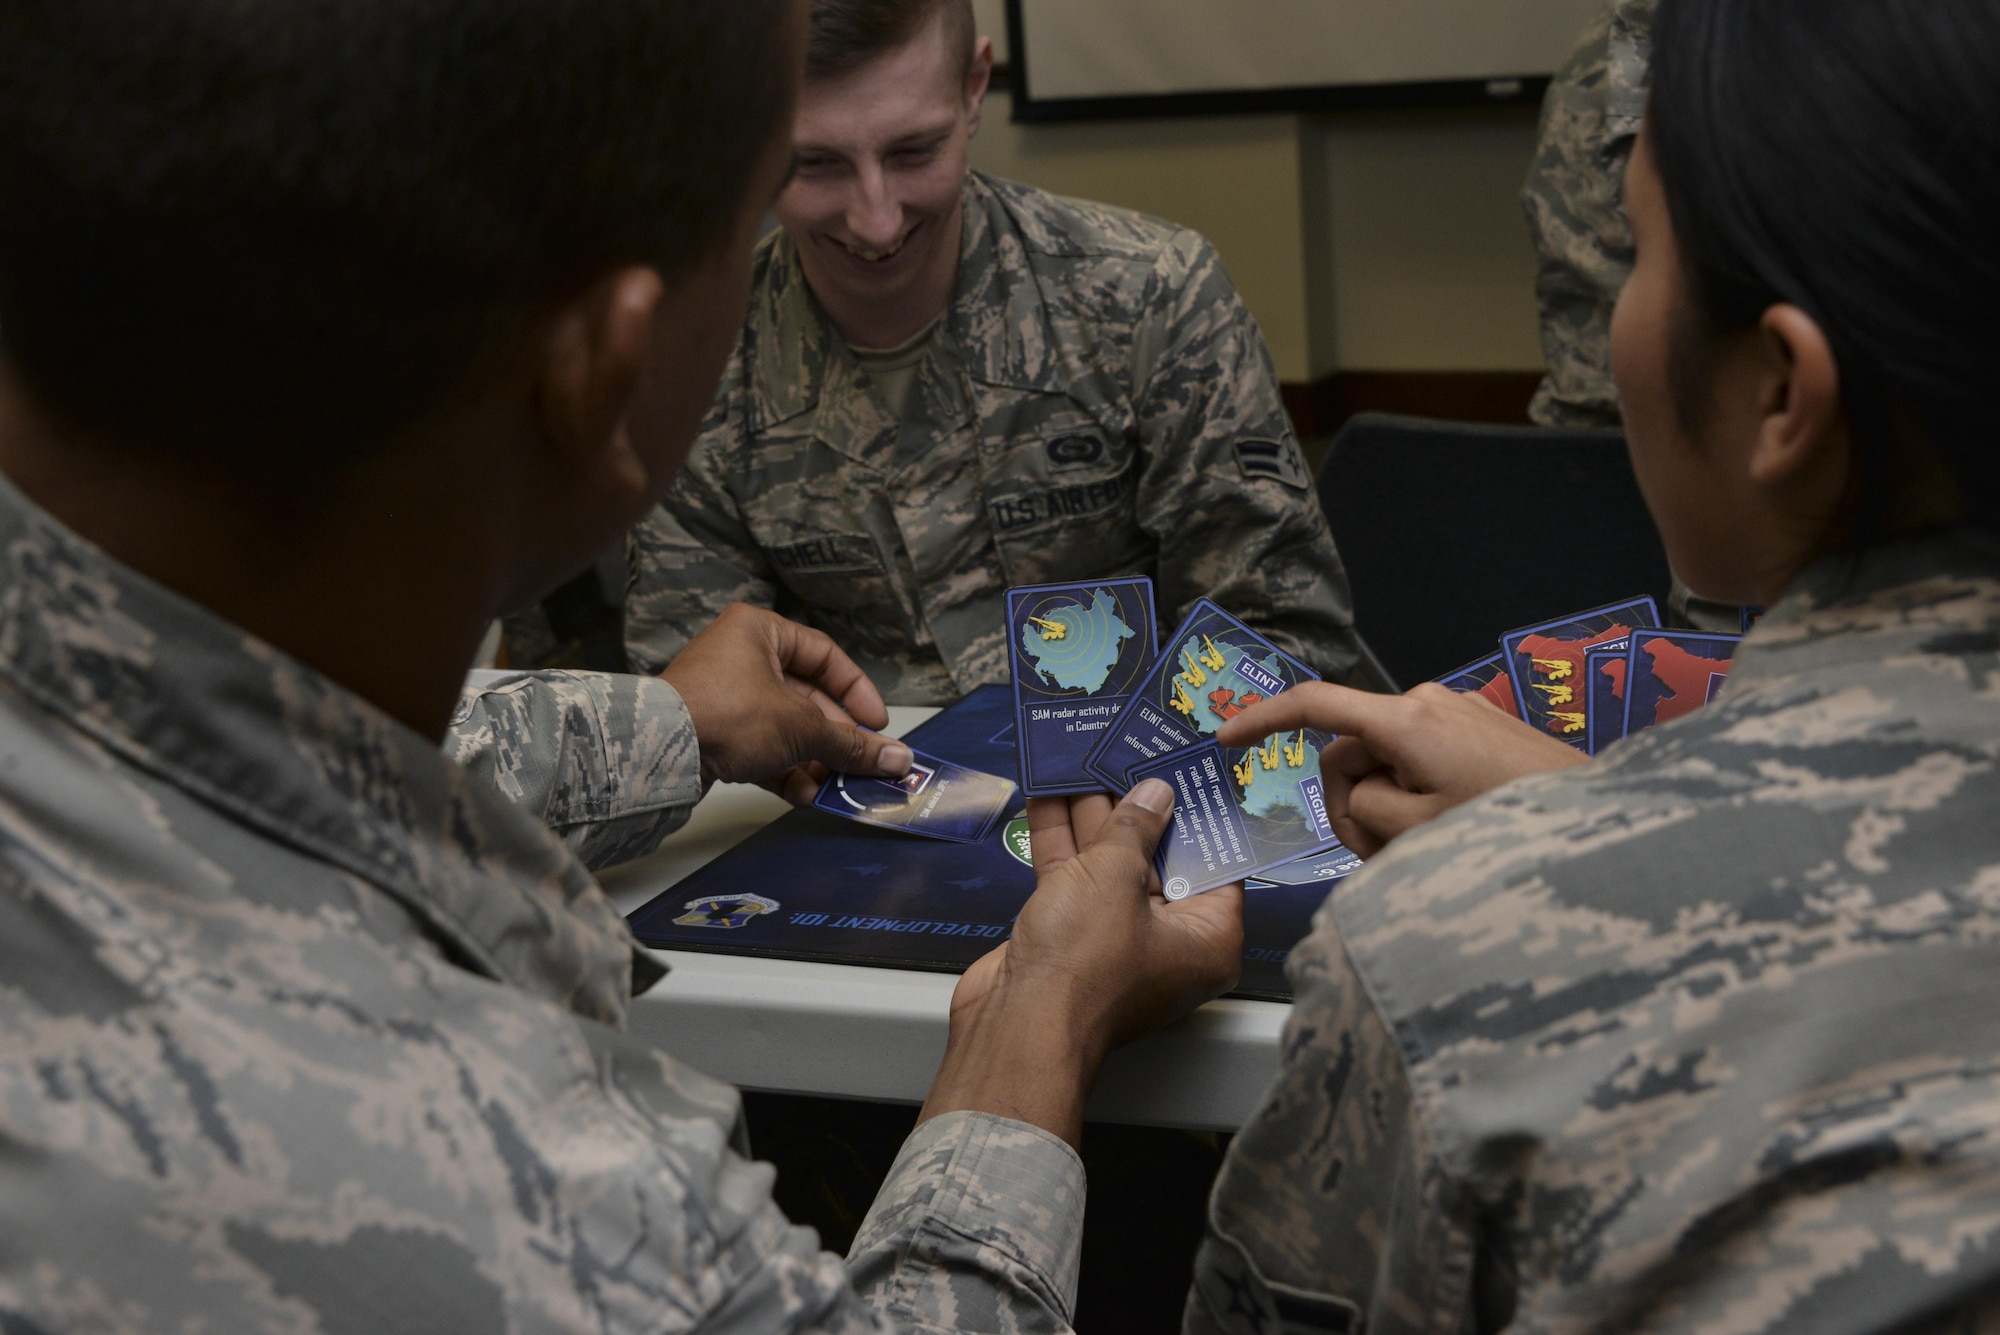 Airmen from the 70th Intelligence, Surveillance and Reconnaissance Wing play BLUE TALON, an interactive mission training tool during their National Tactical Integration training November 4, 2016 at Fort Meade, Md. AF NTI works as an enterprise that collaborates to enhance Air Component operations around the world, as well as leveraging critical nation Intelligence Community information and capabilities. (U.S. Air Force photo/Staff Sgt. Alexandre Montes)